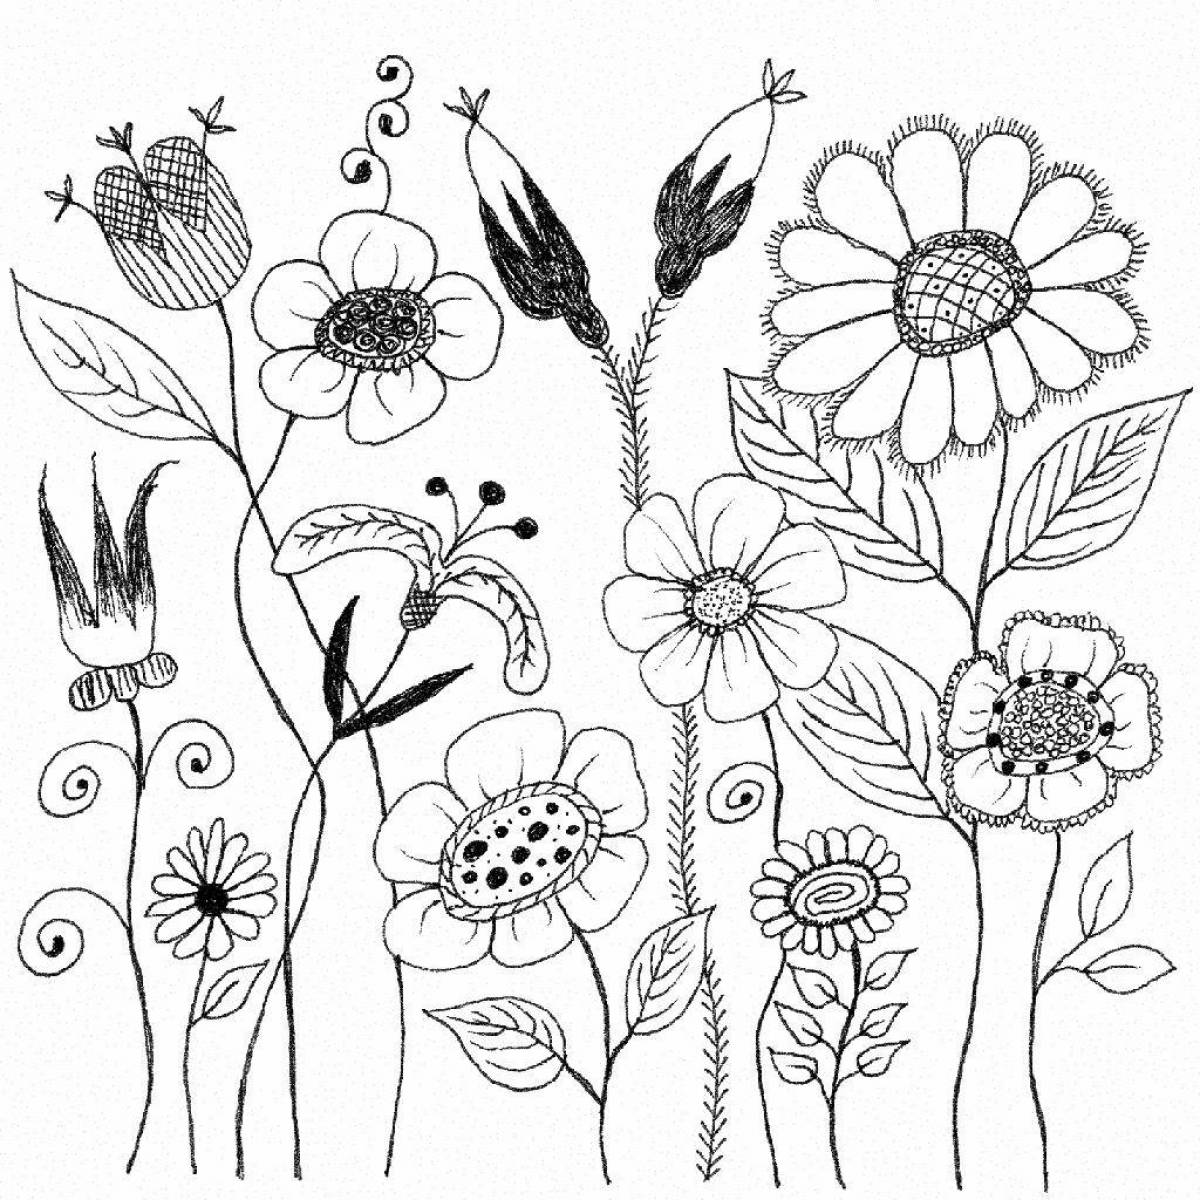 Exquisite botany coloring page